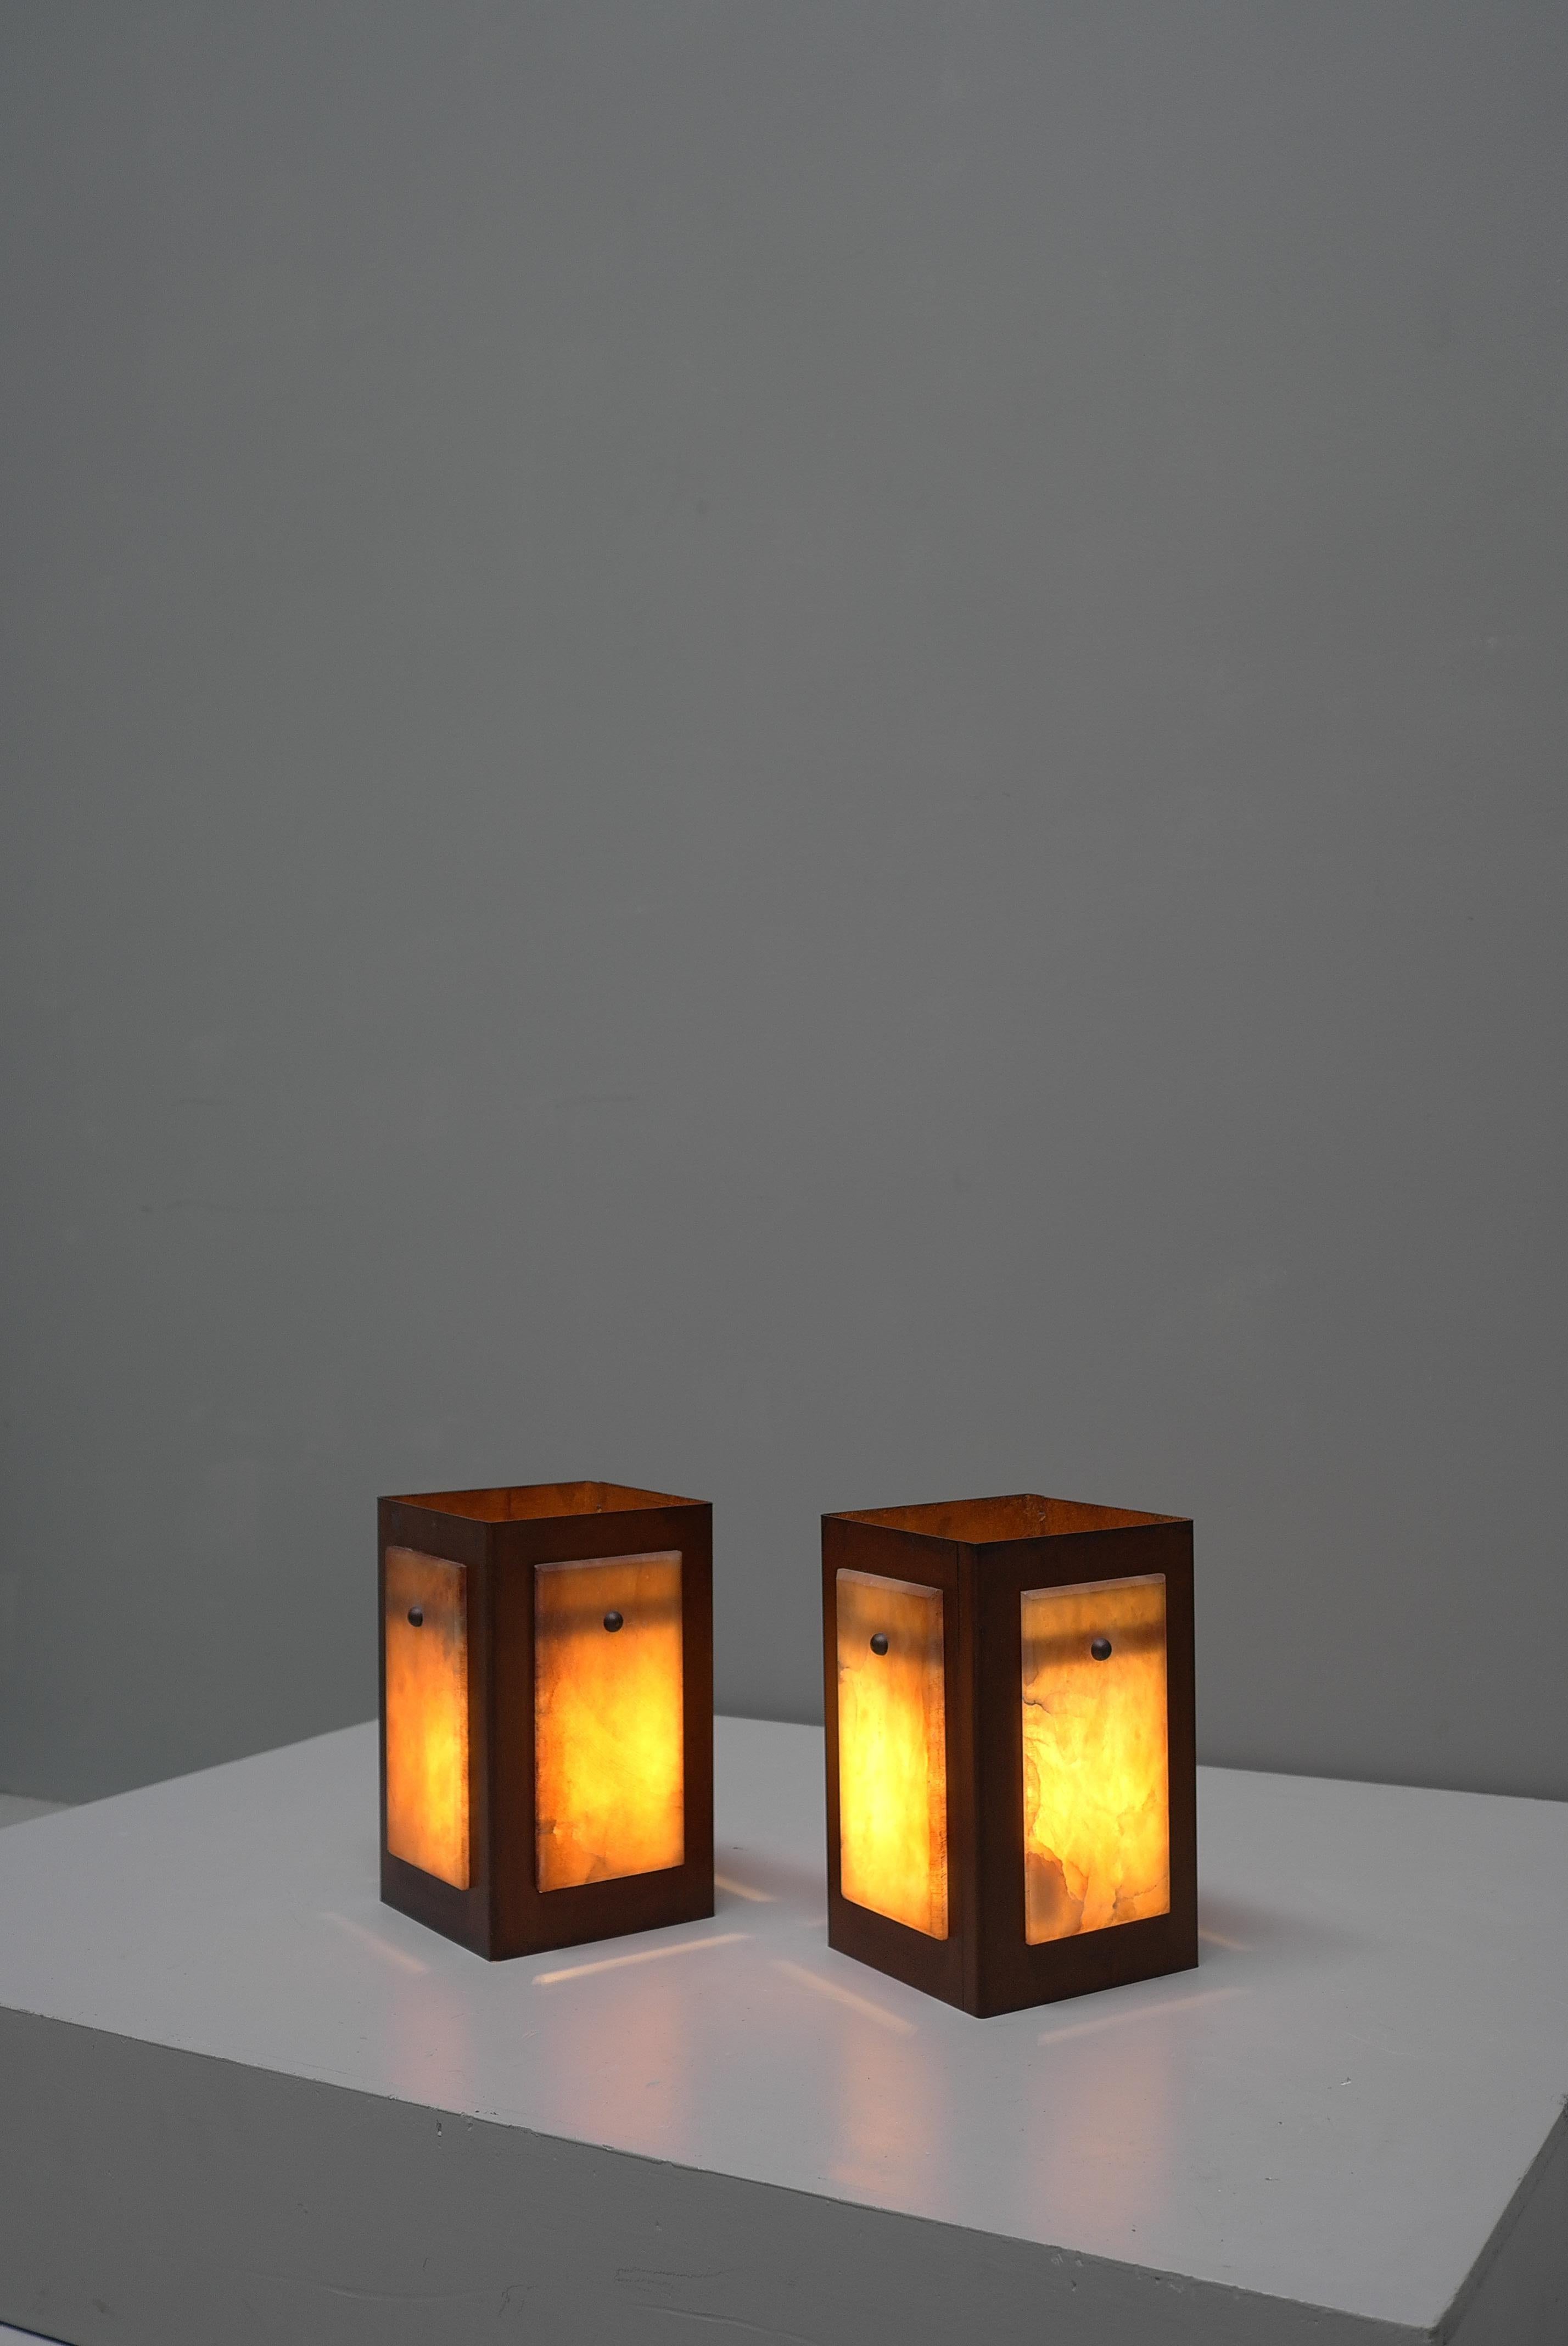 Mid-Century Modern Table Lamps in Alabaster Stone and Rusty Metal, by Pegasam, Spain 1970s For Sale